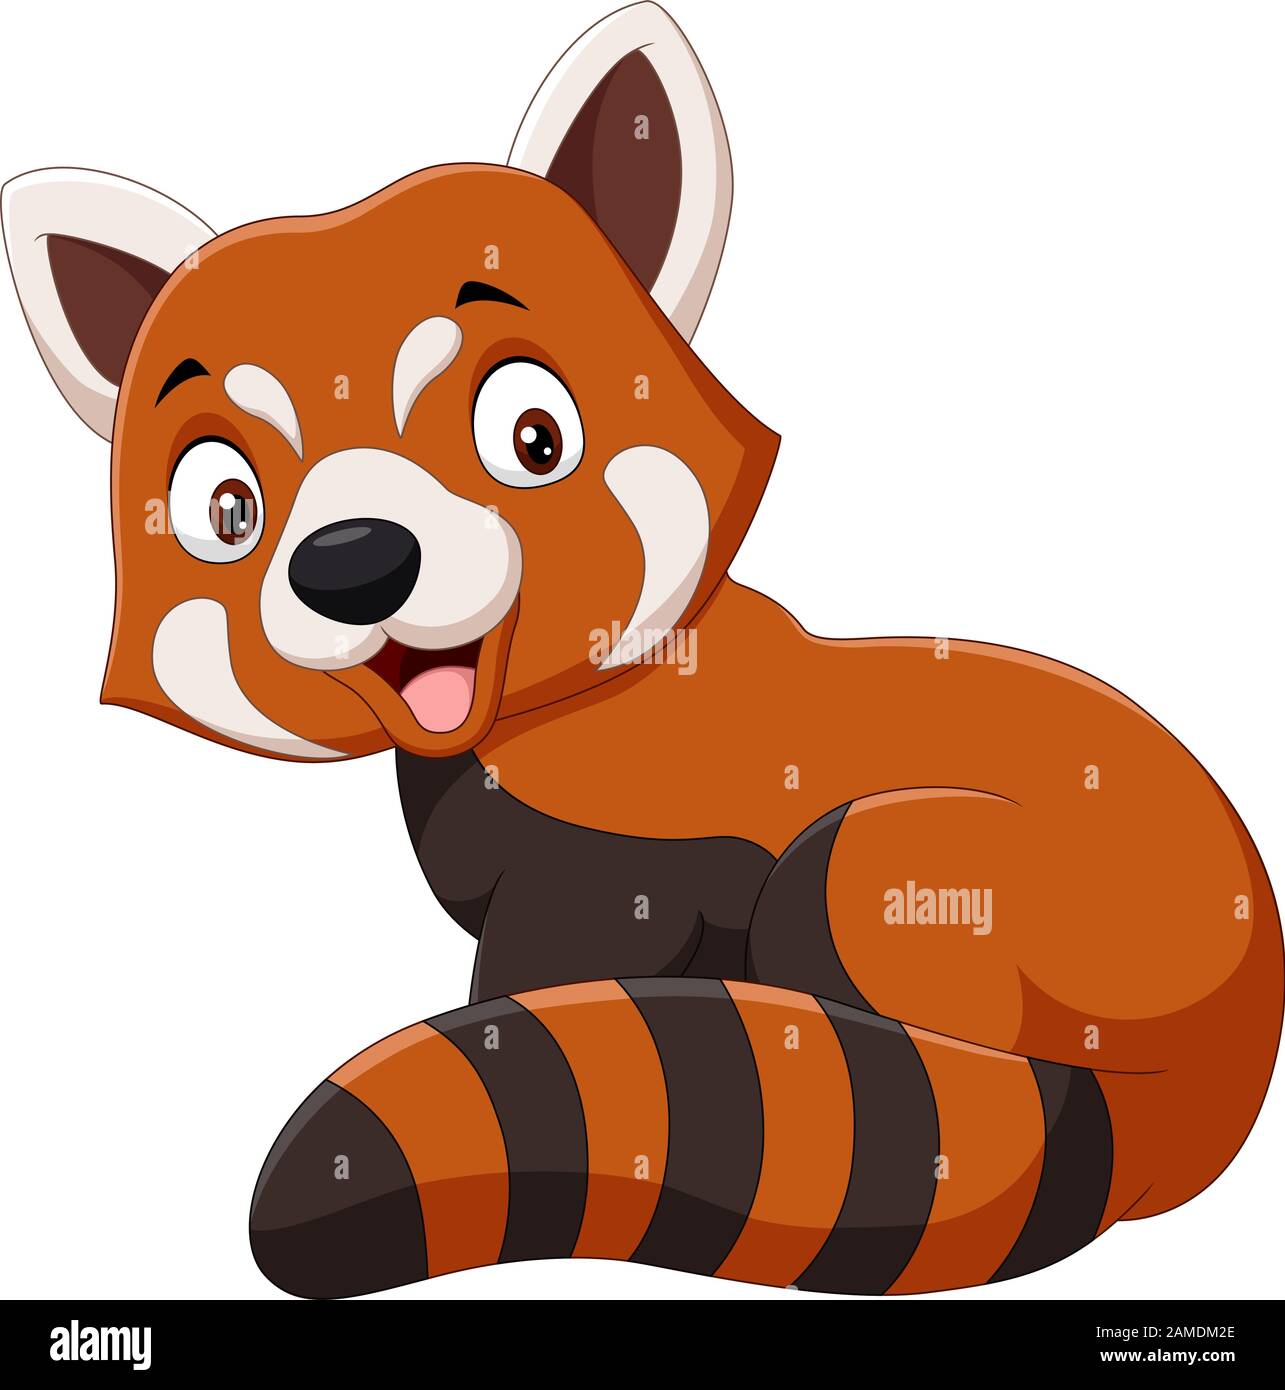 Cartoon smiling red panda on white background Stock Vector